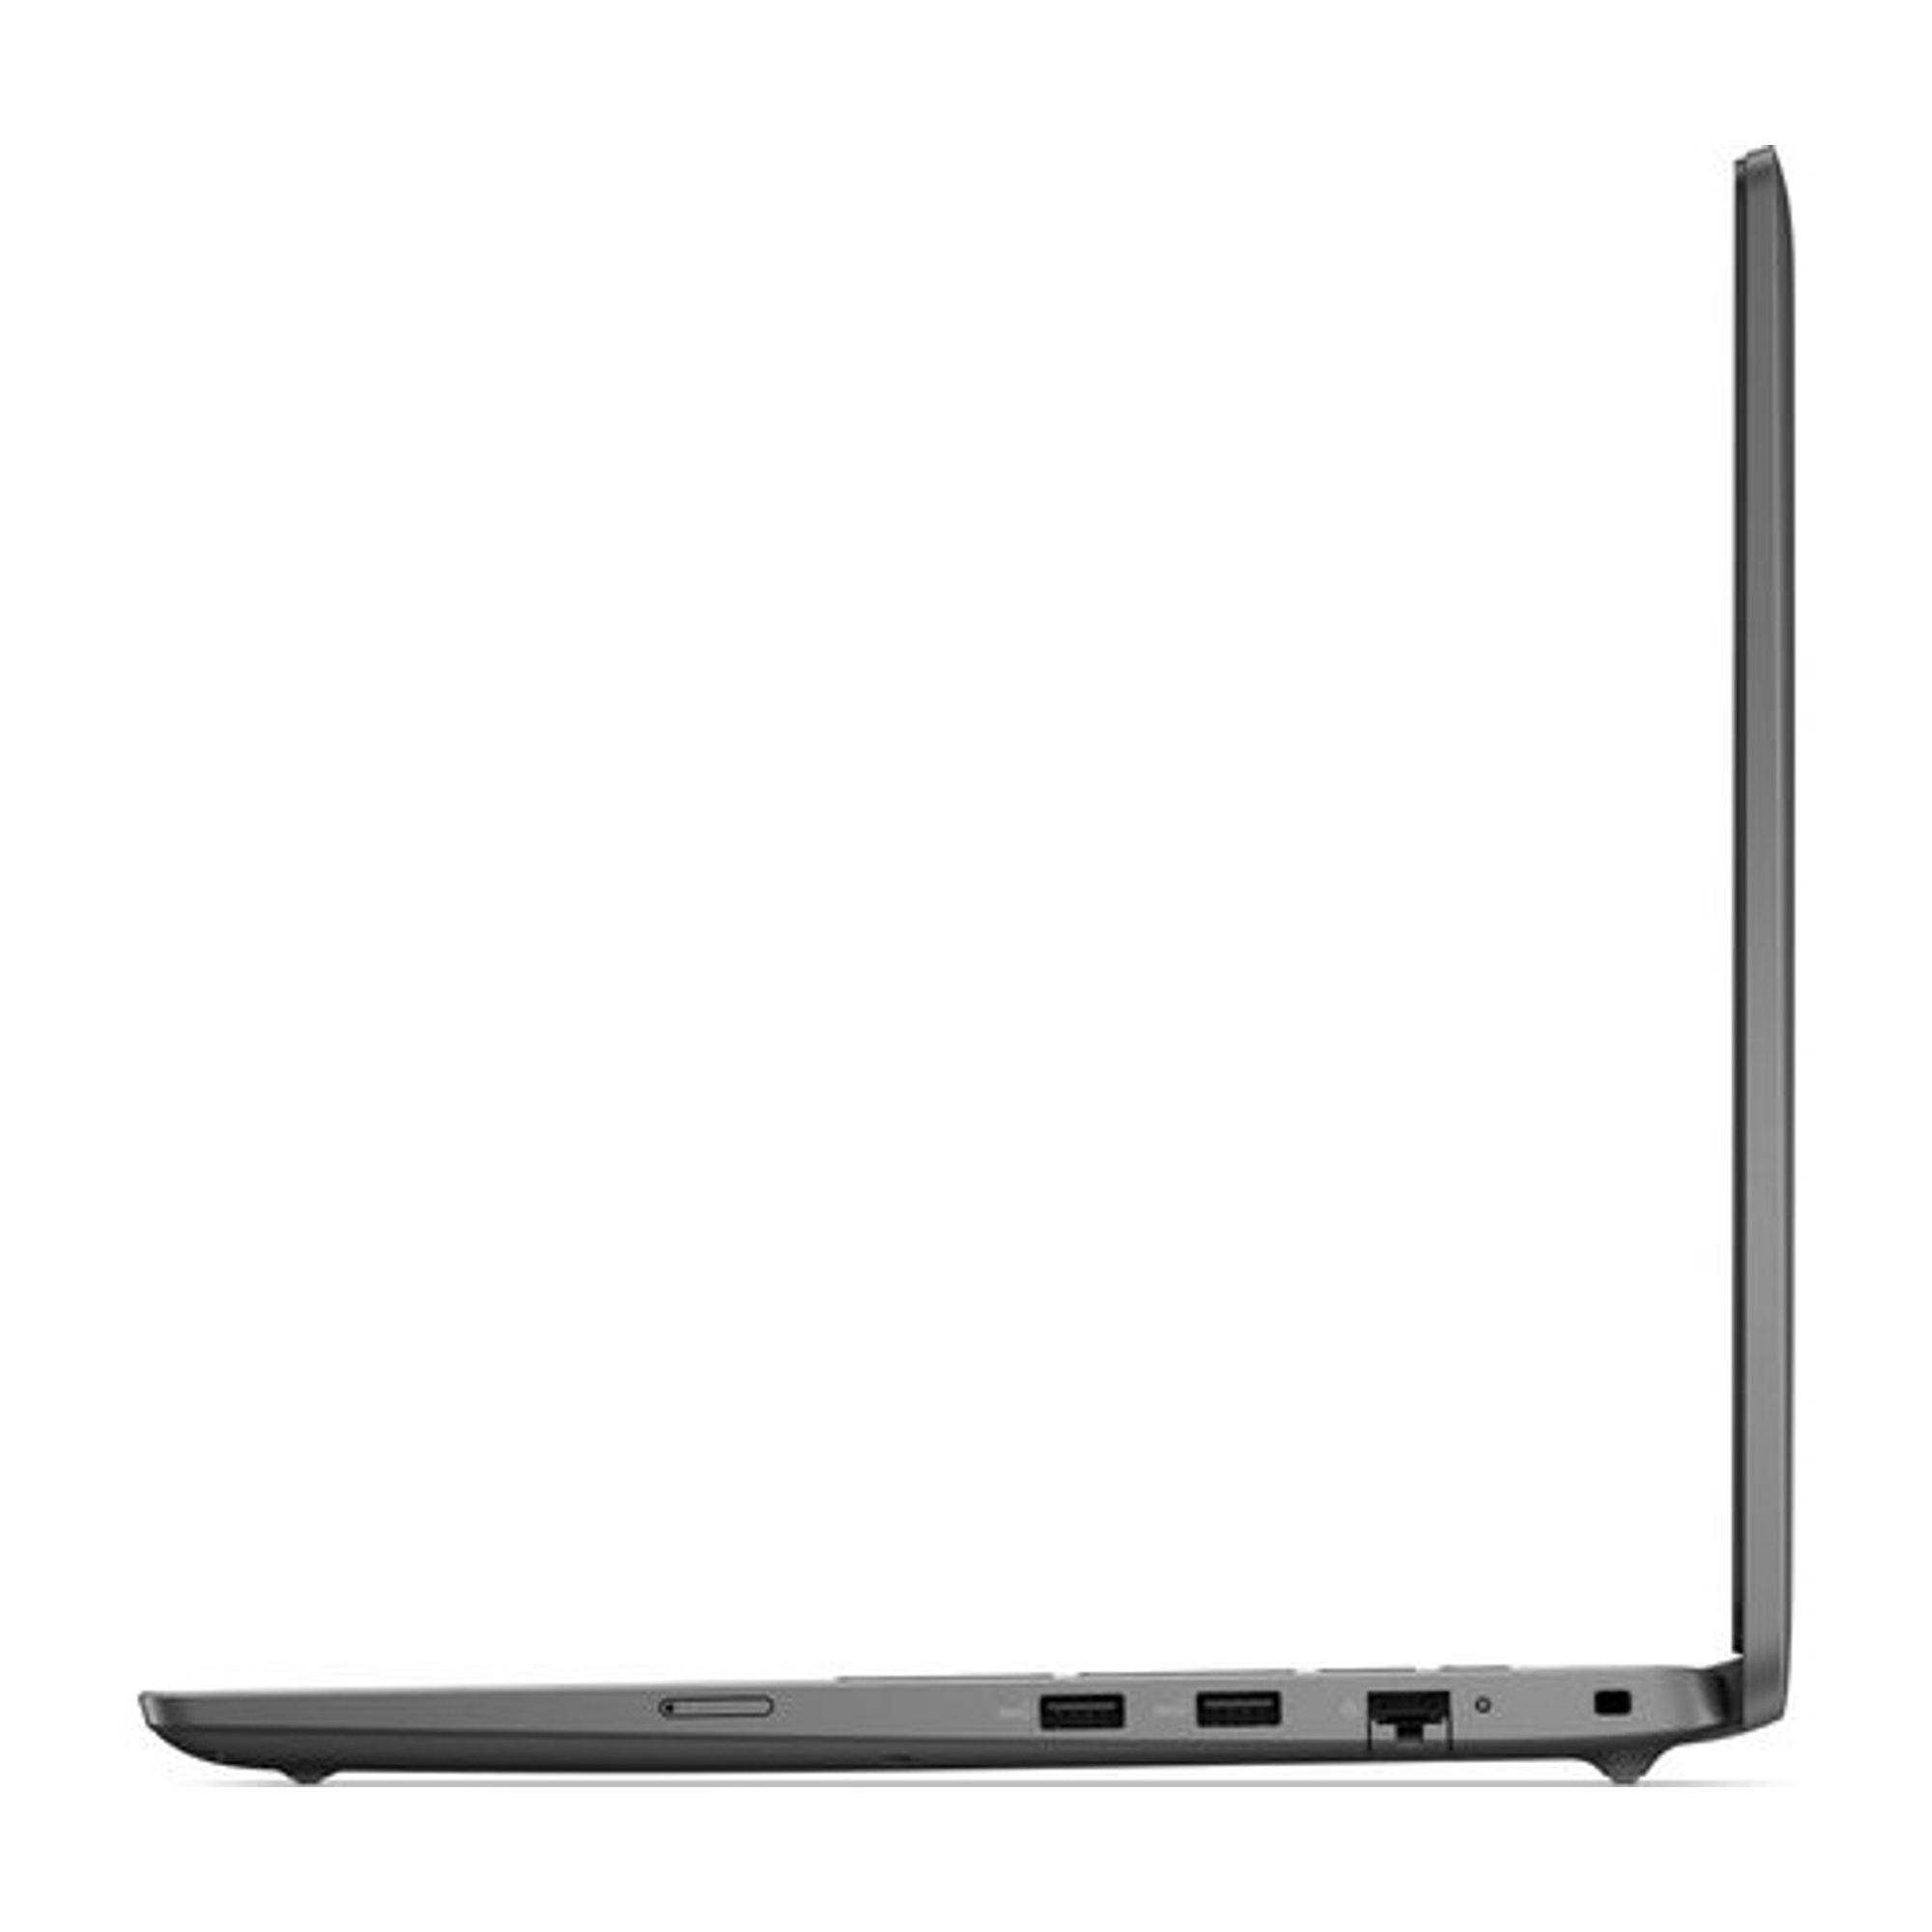 DELL L3540-21 Laptop / Notebook 4